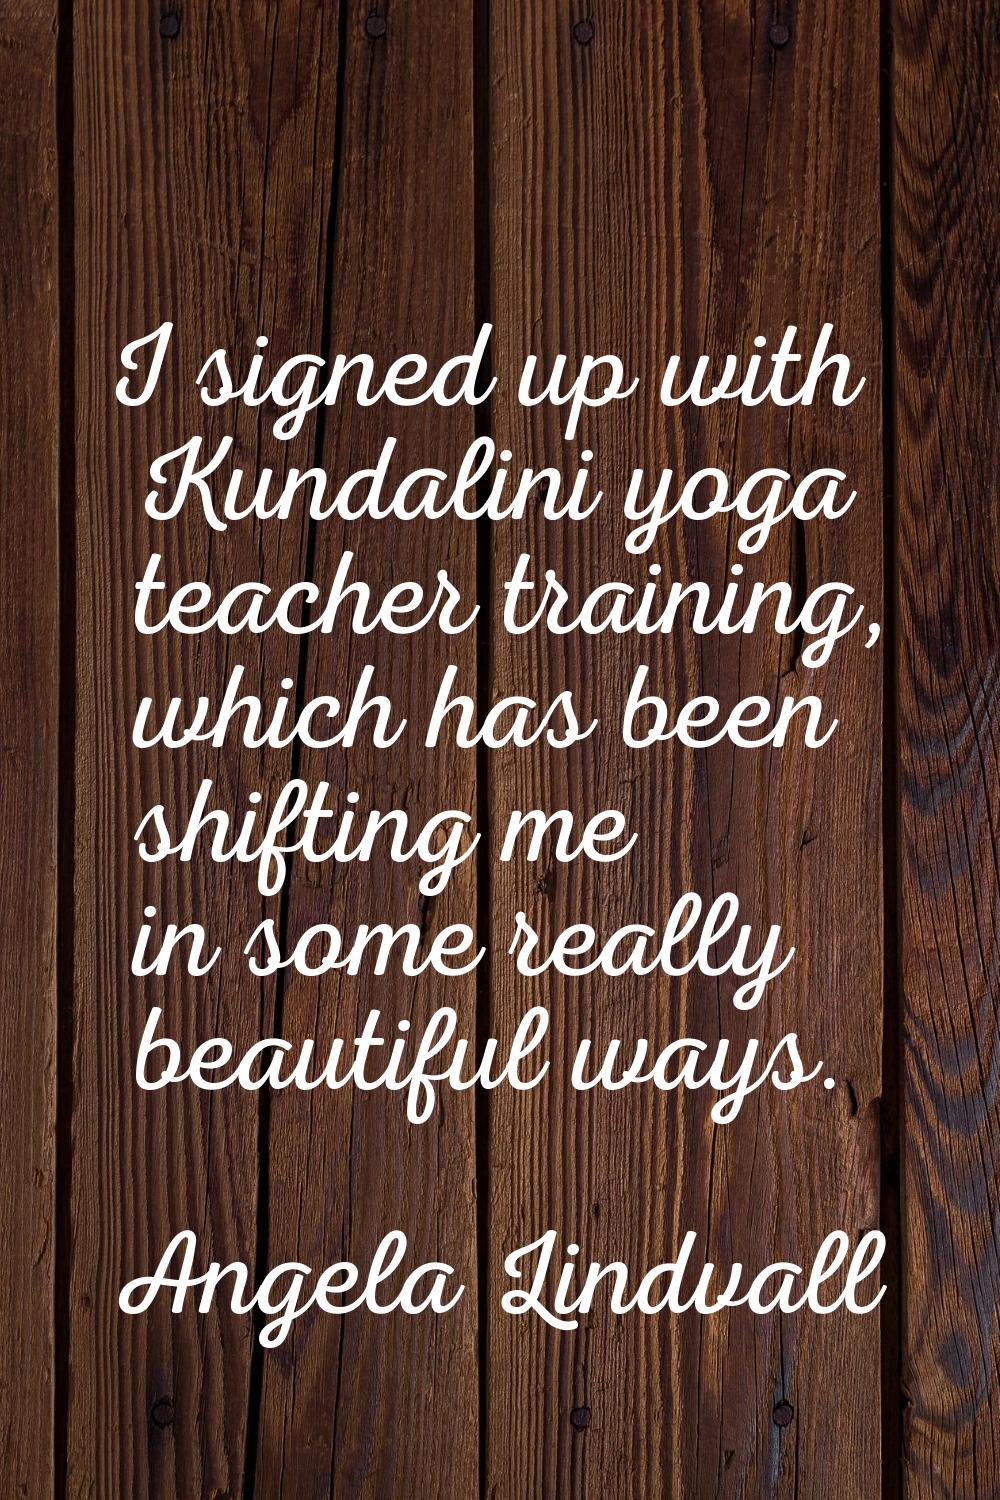 I signed up with Kundalini yoga teacher training, which has been shifting me in some really beautif